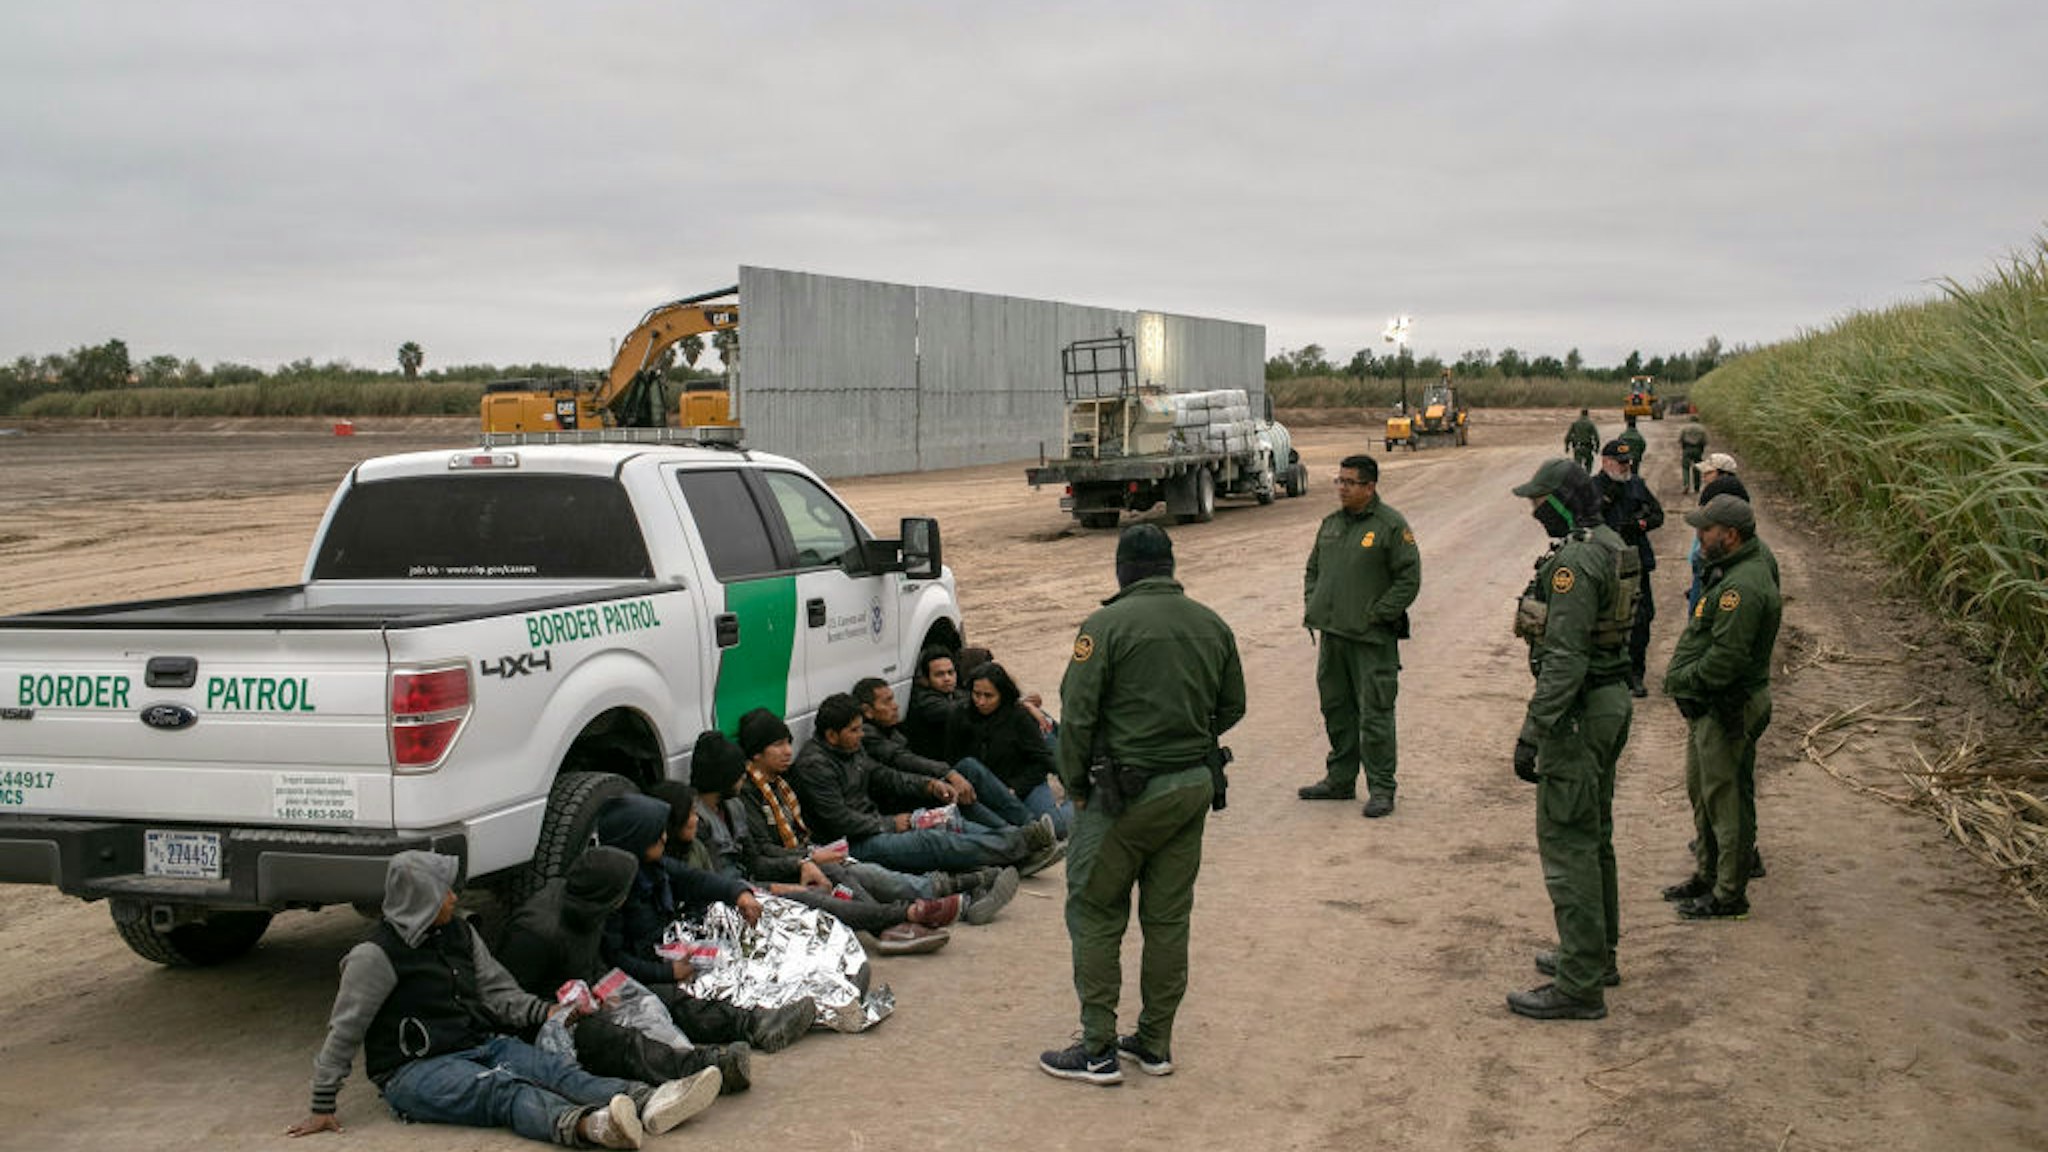 MISSION, TEXAS - DECEMBER 11: U.S. Border Patrol agents detain undocumented immigrants caught near a section of privately-built border wall under construction on December 11, 2019 near Mission, Texas. The hardline immigration group We Build The Wall is funding construction of the wall on private land along the Rio Grande, which forms the border with Mexico. The group, led by former Trump strategist Stephen Bannon claims to have raised tens of millions of dollars in a GoFundMe drive to build sections of wall along stretches of the U.S. southwest border with Mexico. (Photo by John Moore/Getty Images)